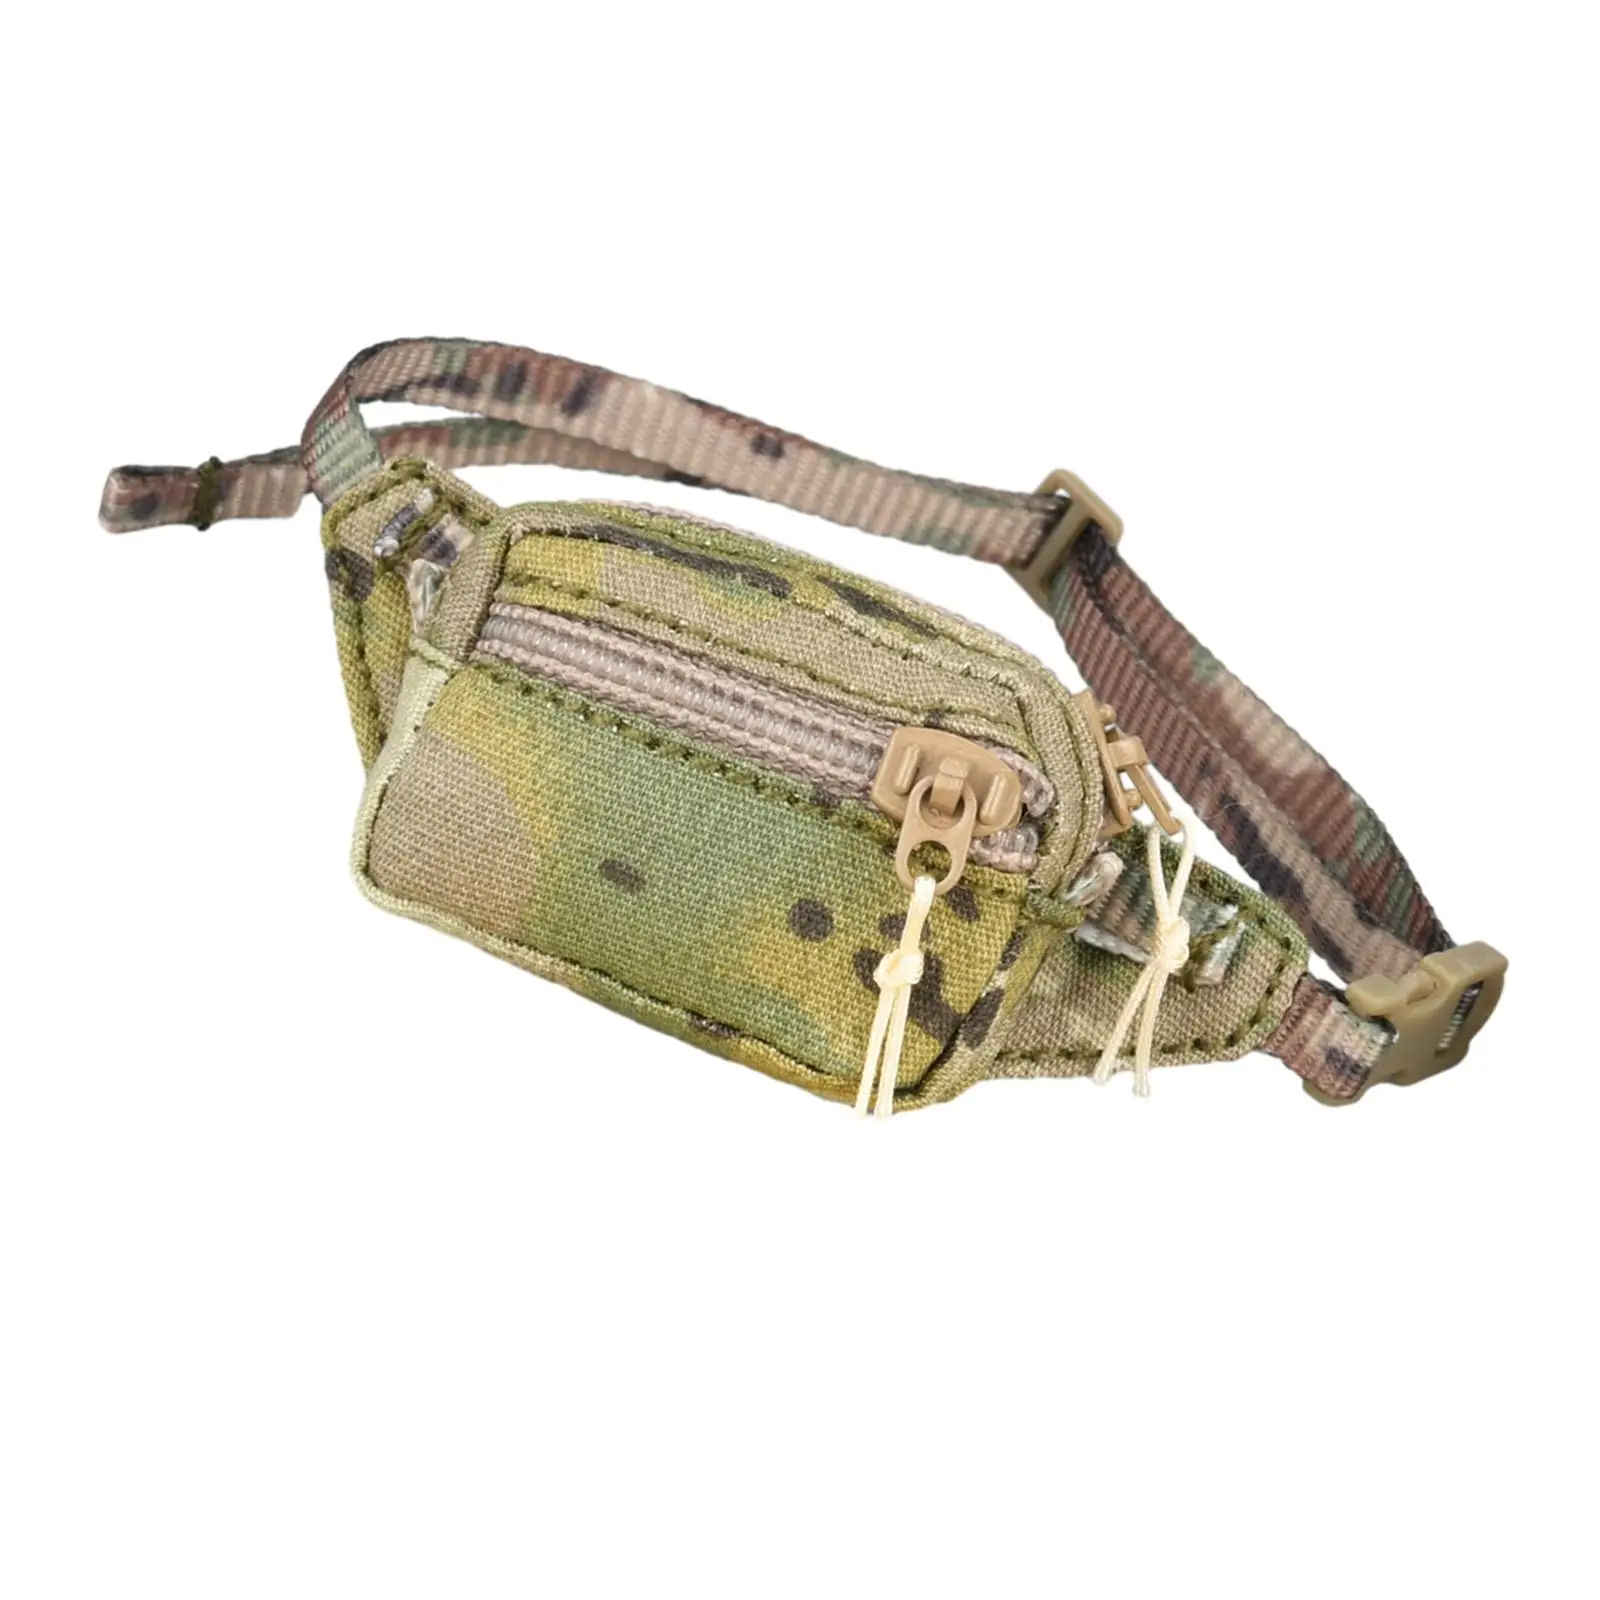 1/6 Scale Soldier Waist Bag\ Durable Kids Pretend Playset Decor Waist Belt Tool Pouch Toys for 12inch Action Figures Accessories